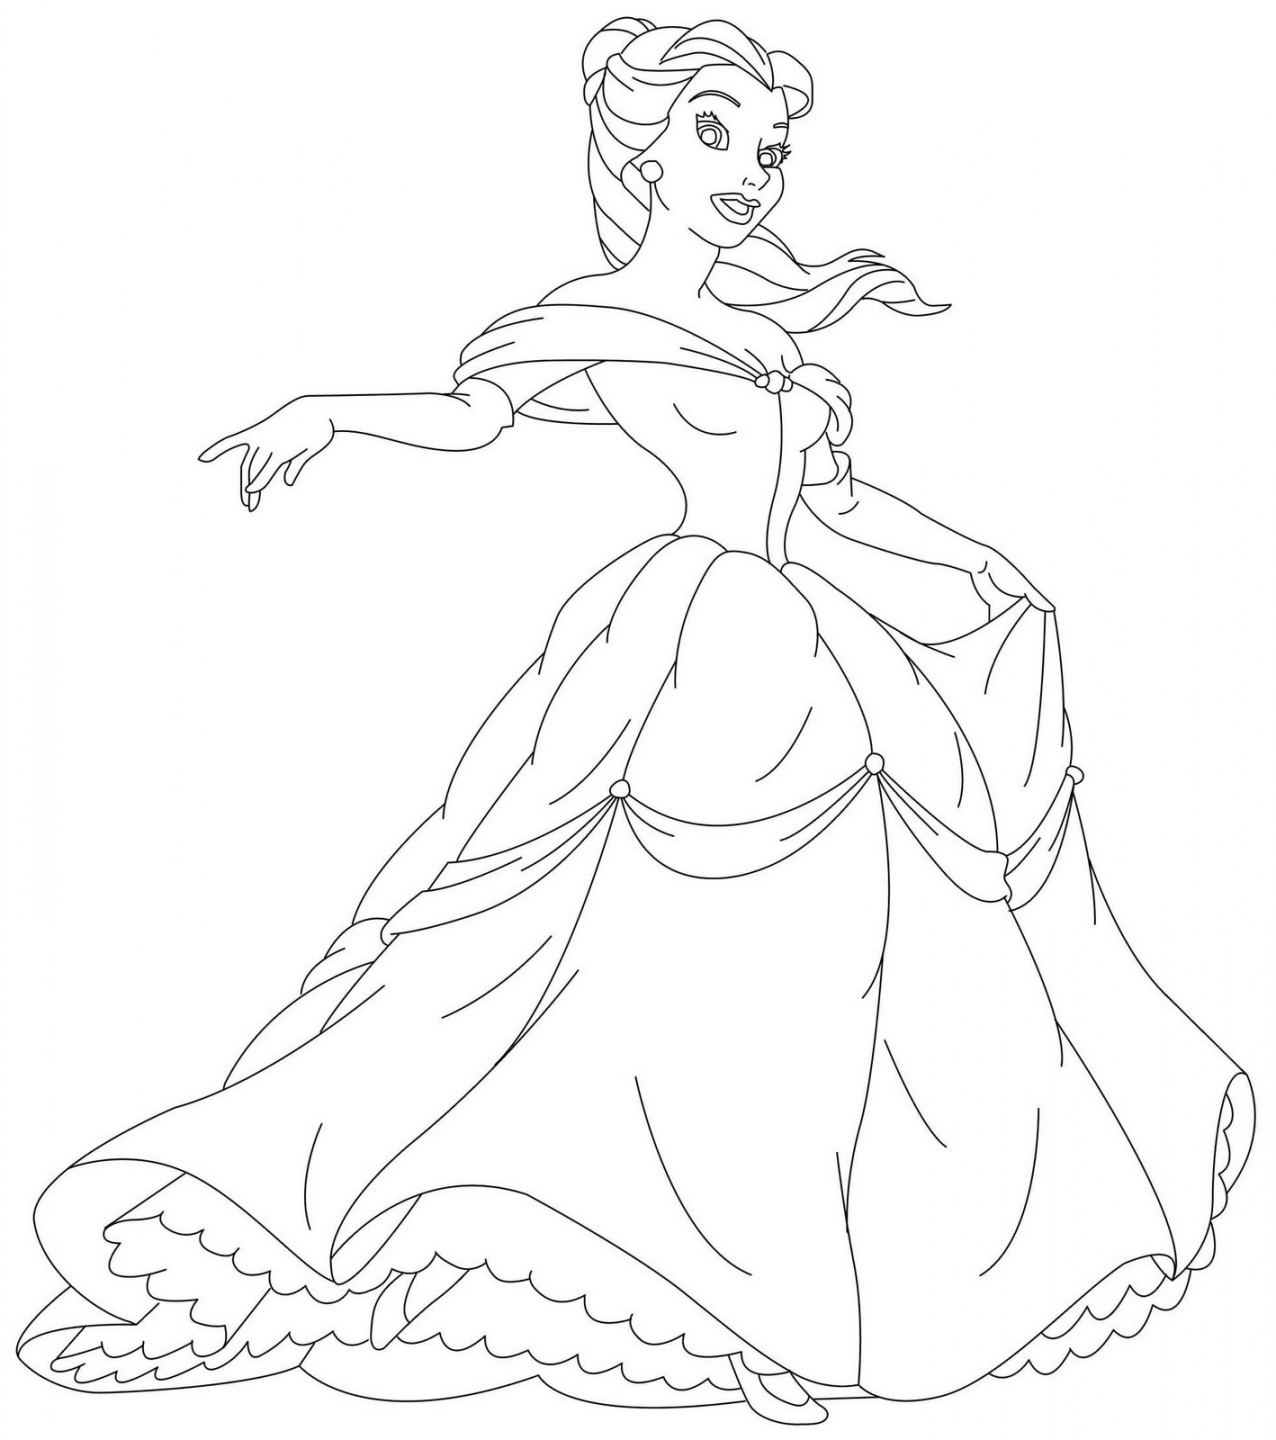 Free Printable Disney Princess Coloring Pages For Kids - FREE Printables - Disney Princess Free Printable Coloring Pages